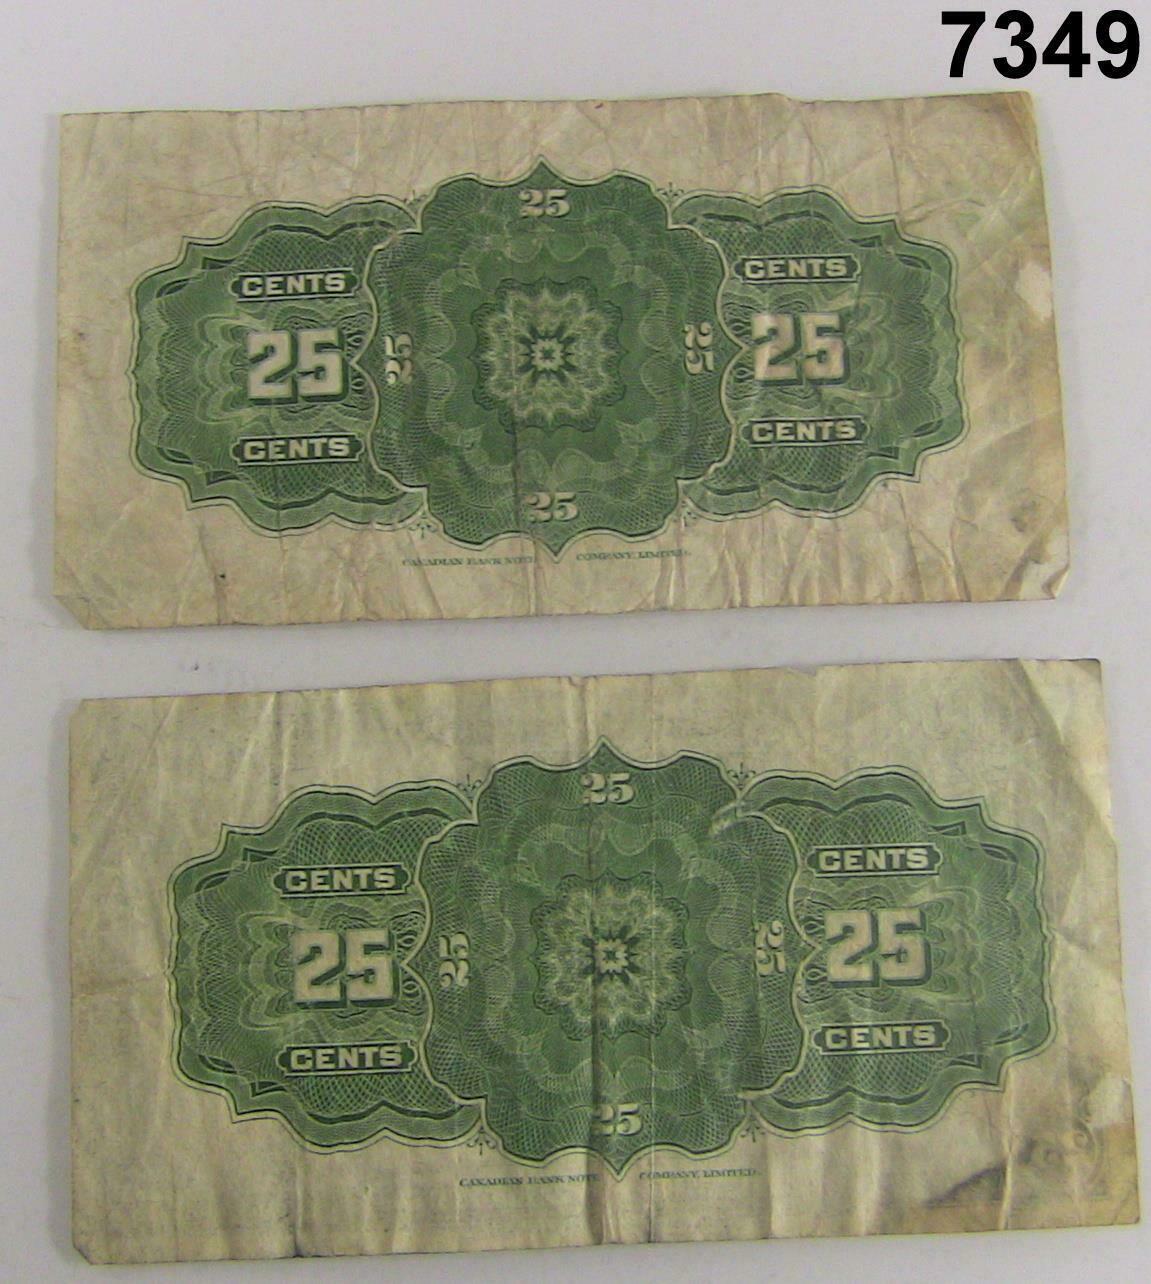 1923 DOMINION OF CANADA 25 CENT SHINPLASTER 2 NOTES SOME STAINS #7349